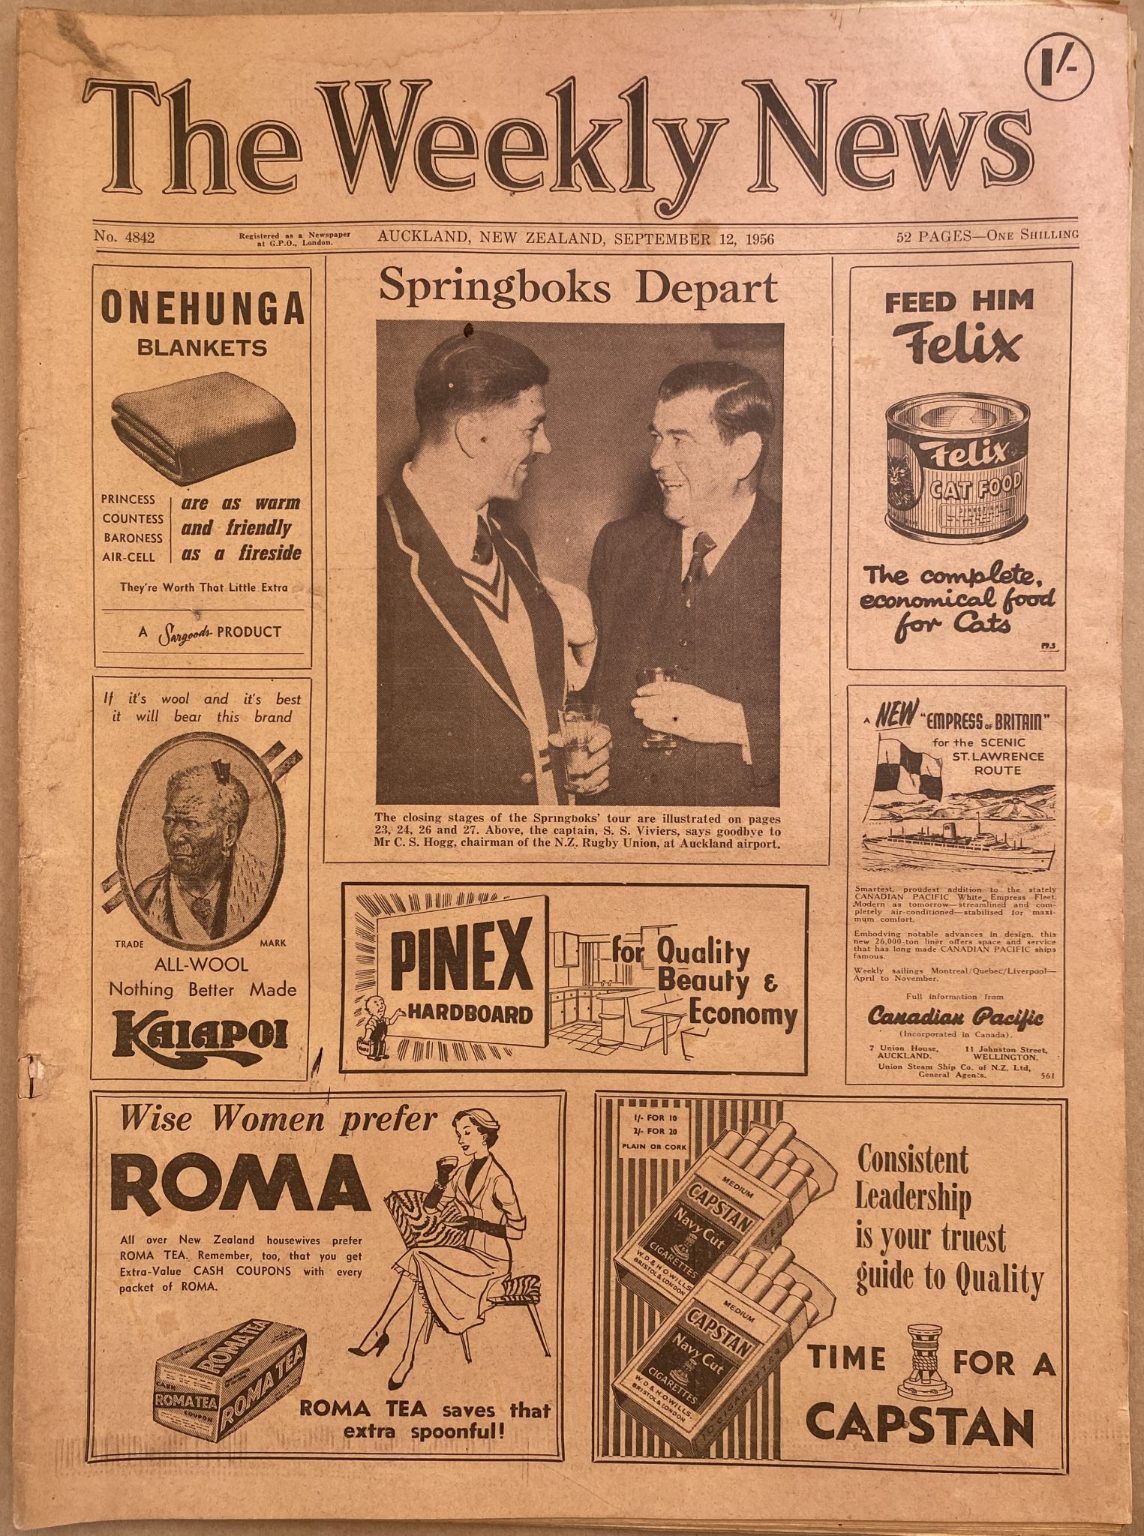 OLD NEWSPAPER: The Weekly News - No. 4842, 12 September 1956